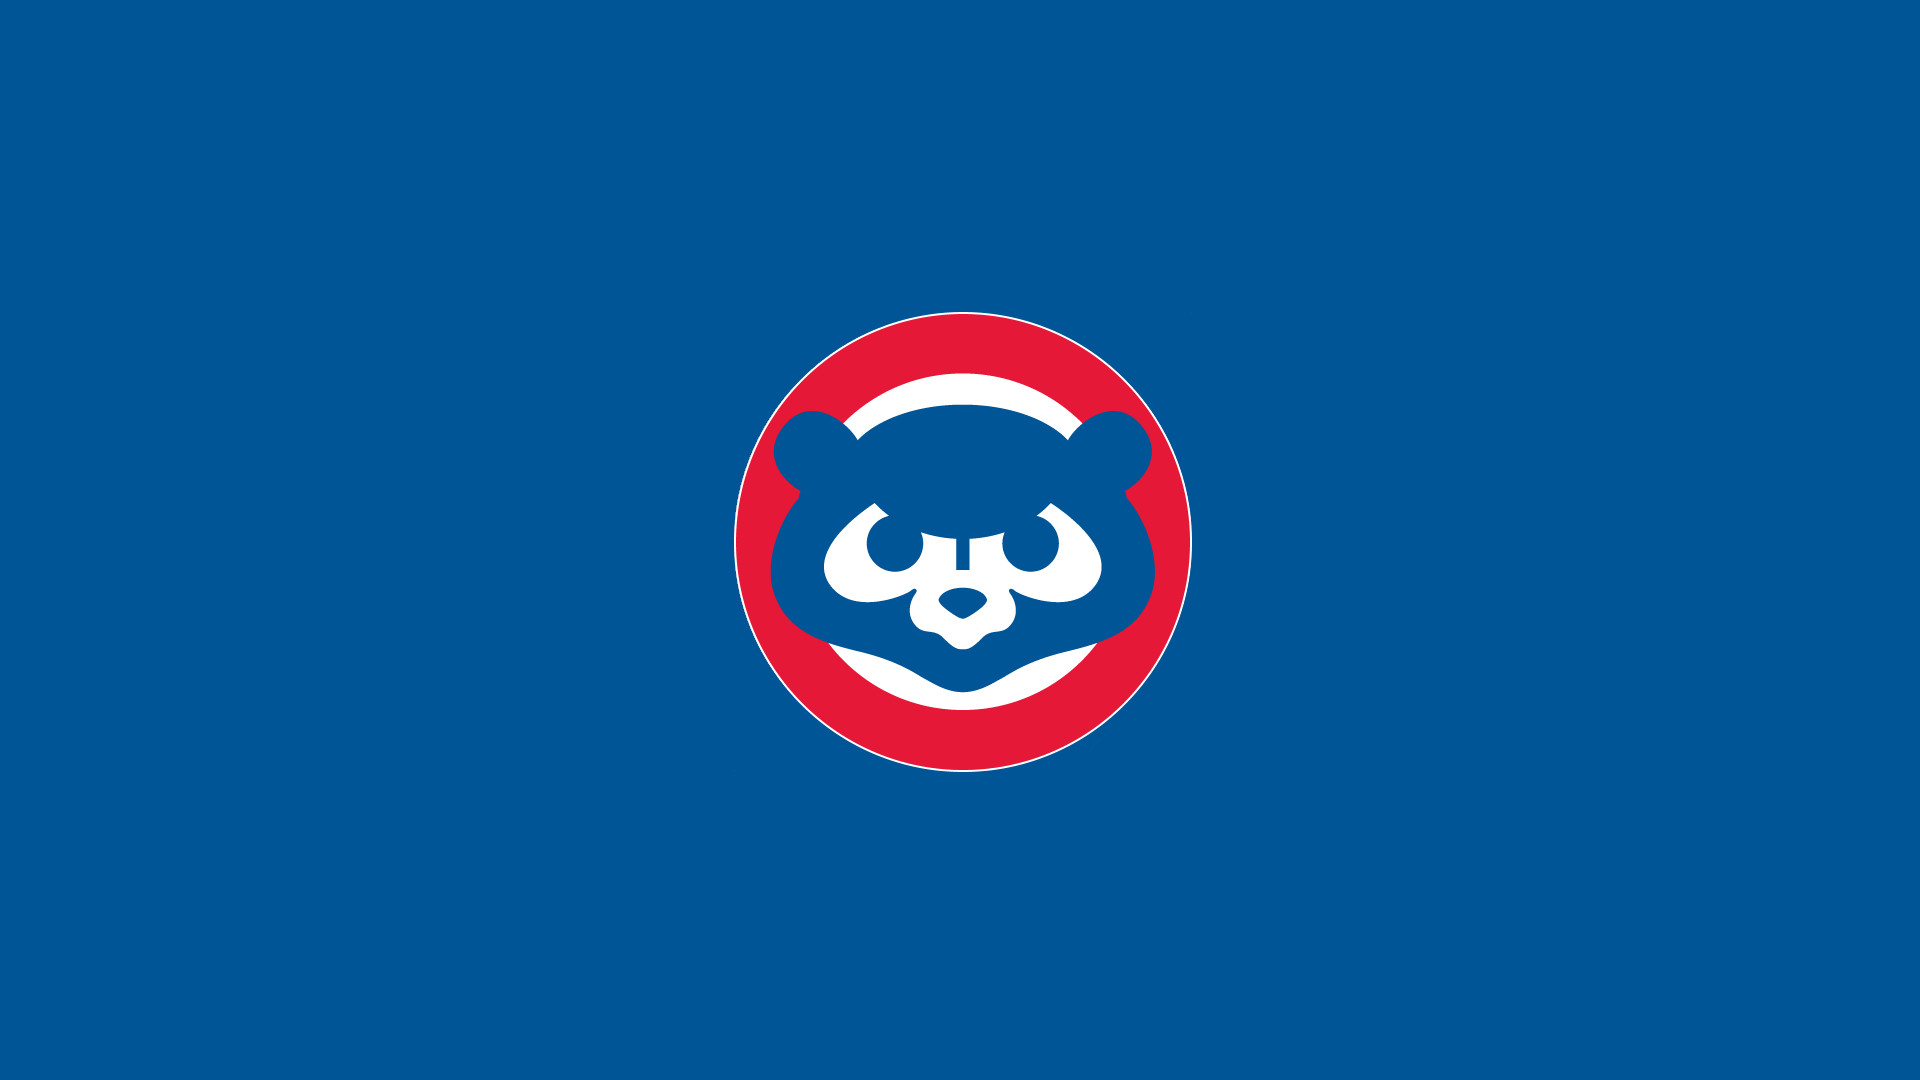 1920x1080 NMgnCP: Chicago Cubs IPhone, by Erlene Tarr